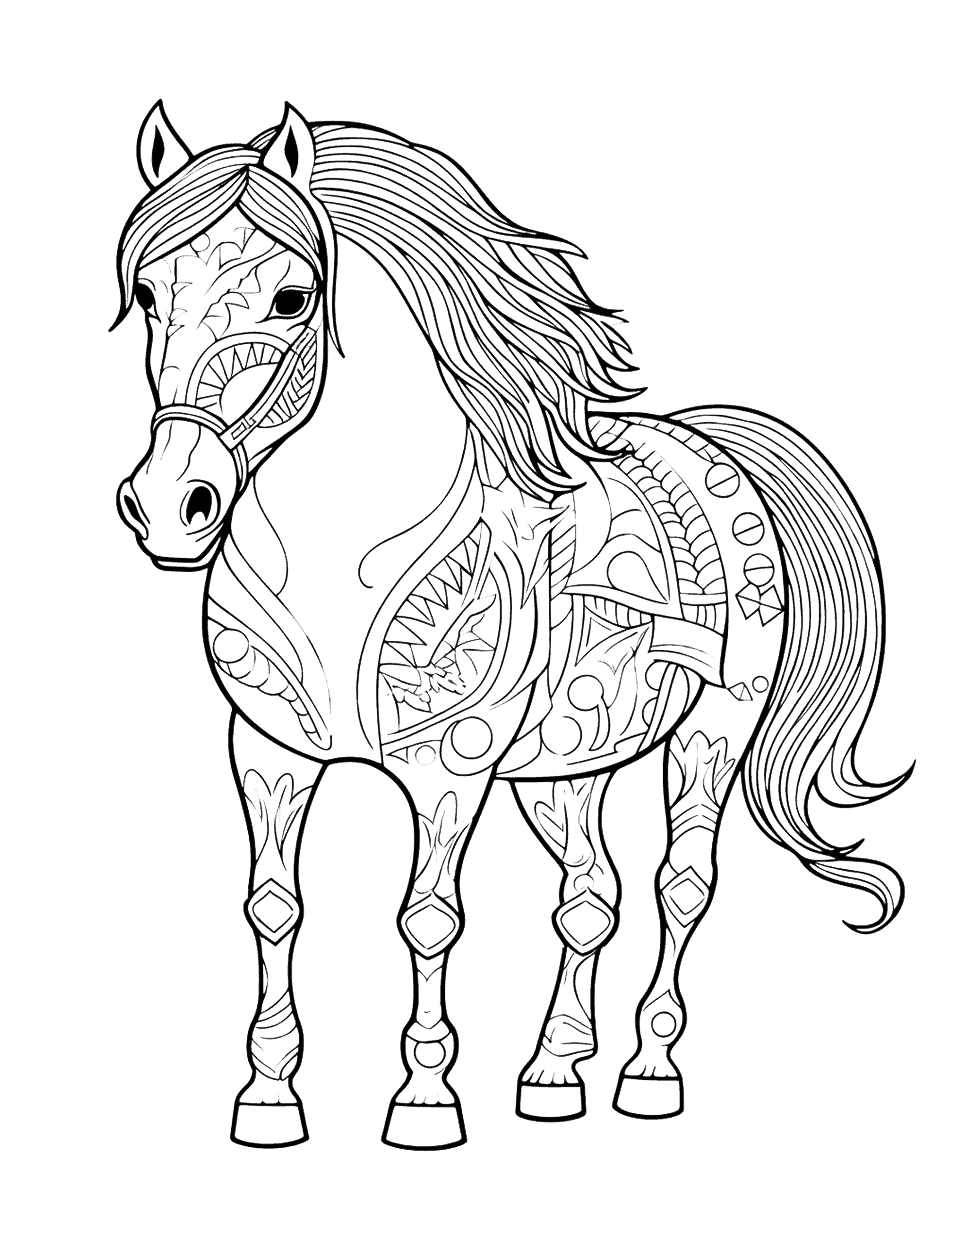 Horse Mandala for Concentration Coloring Page - A detailed horse-themed mandala design that can help improve concentration.